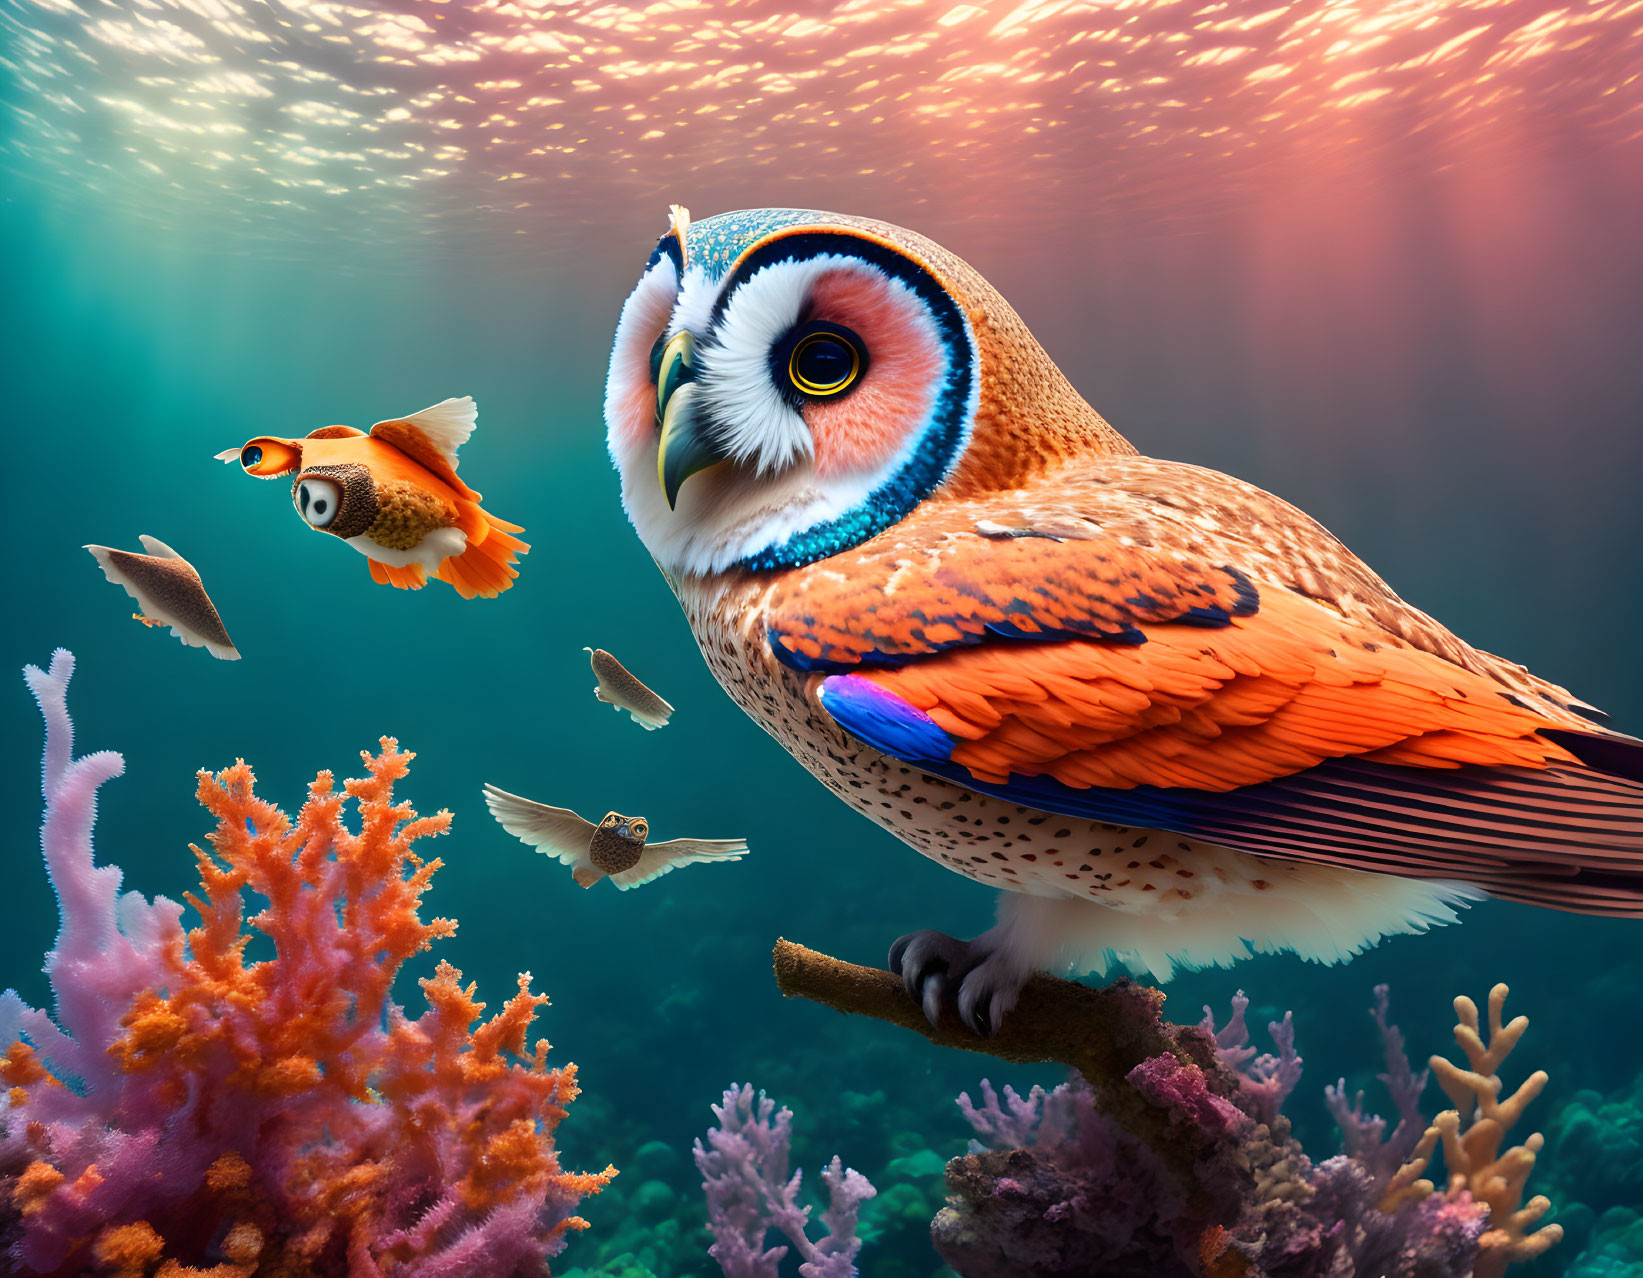 Colorful underwater owl surrounded by coral and fish in dreamlike setting